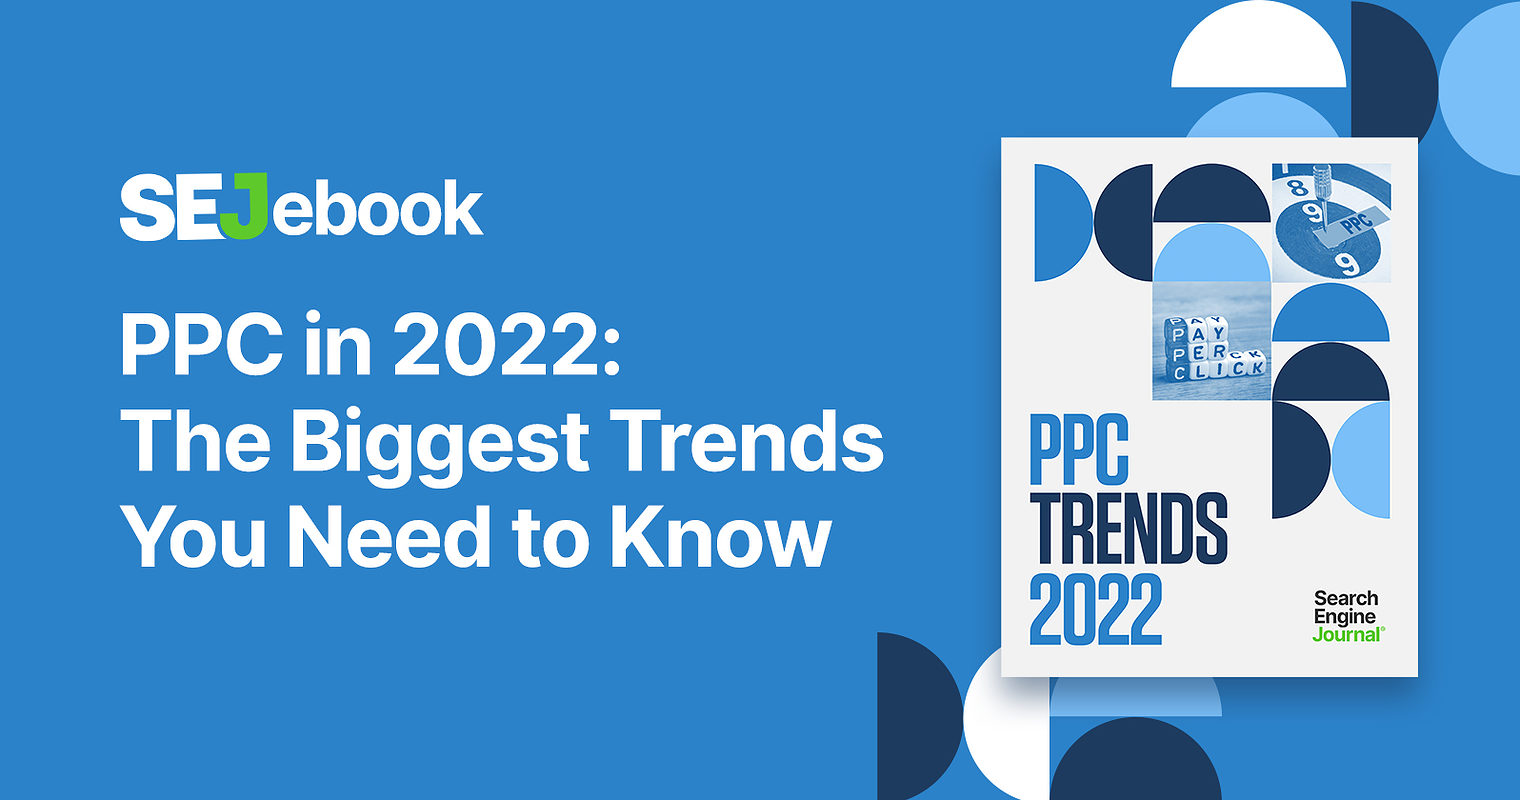 The Biggest PPC Trends of 2022, According to 23 Experts [Ebook]